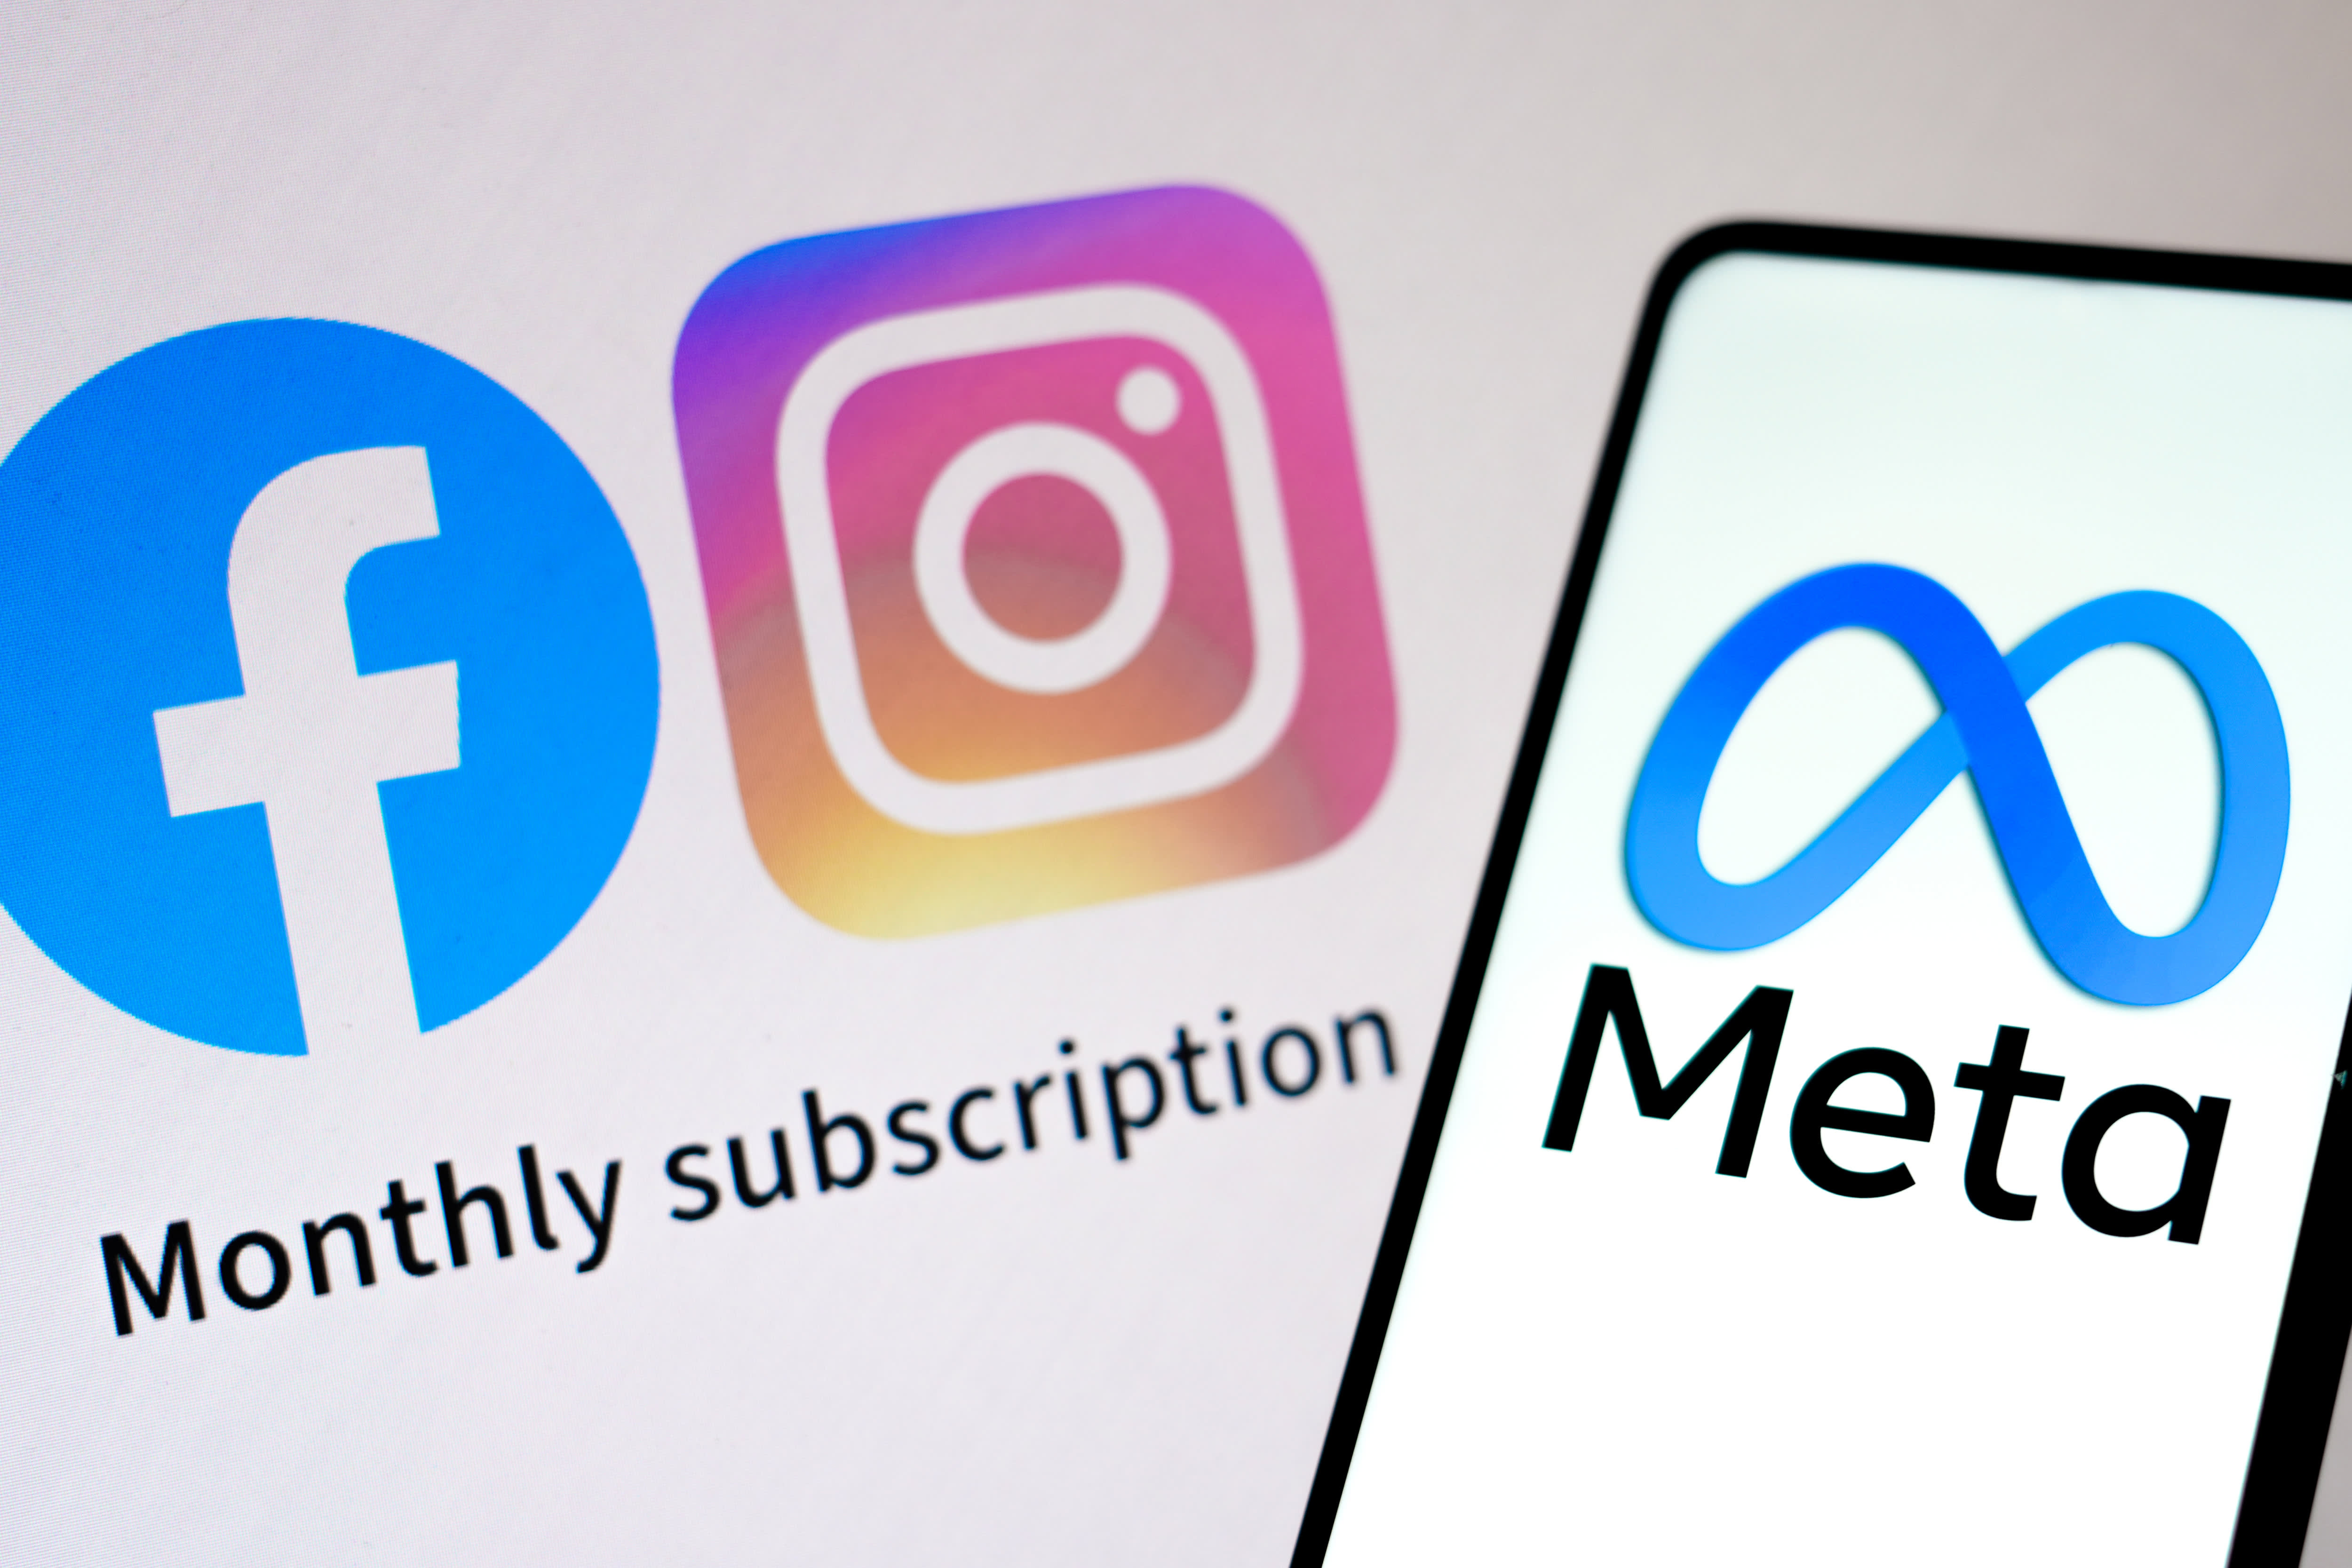 Ready to verified meta Instagram account for sale - Buy & Sell